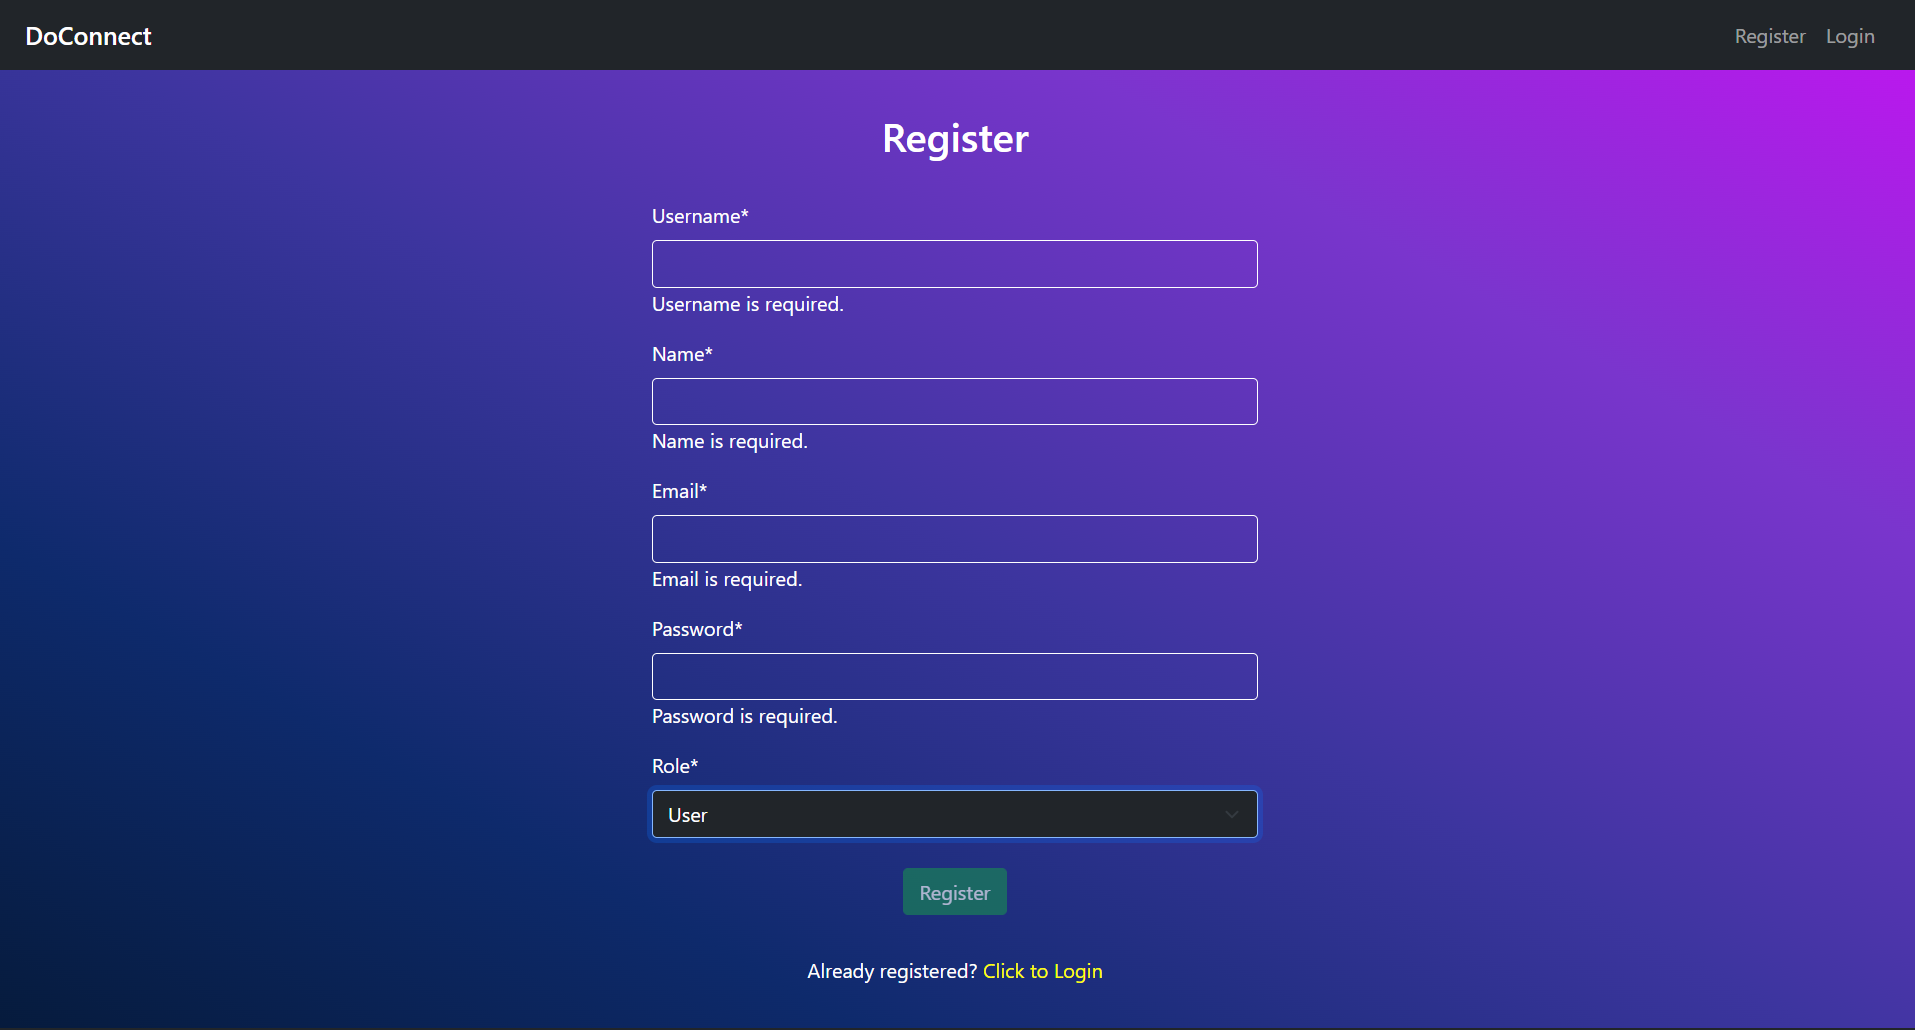 Registration Page with Invalid Fields